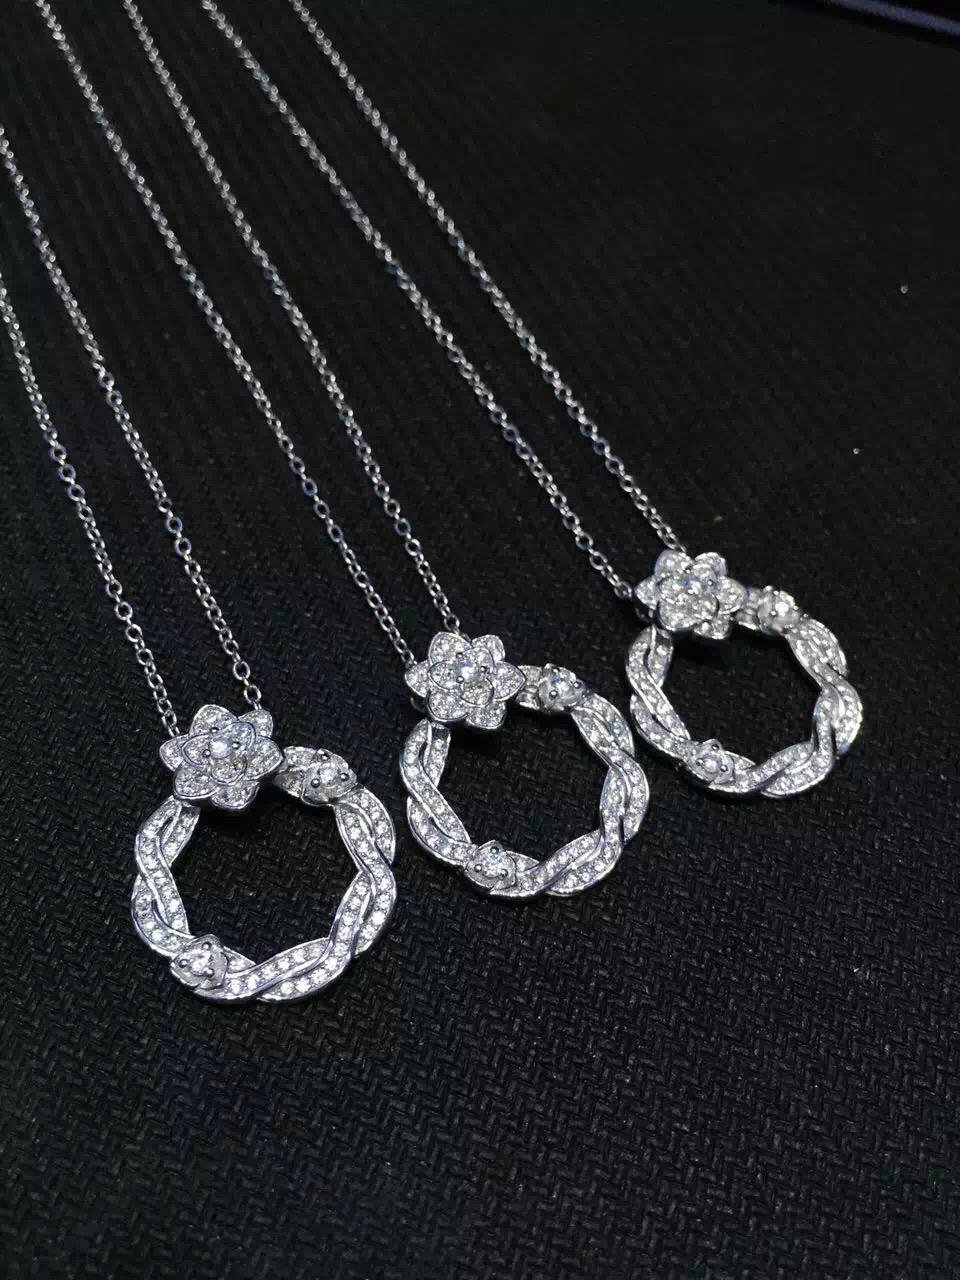 NEFFLY Nice Rose flower 925 Sterling Sliver necklace Women Girls For Party&Gift  4